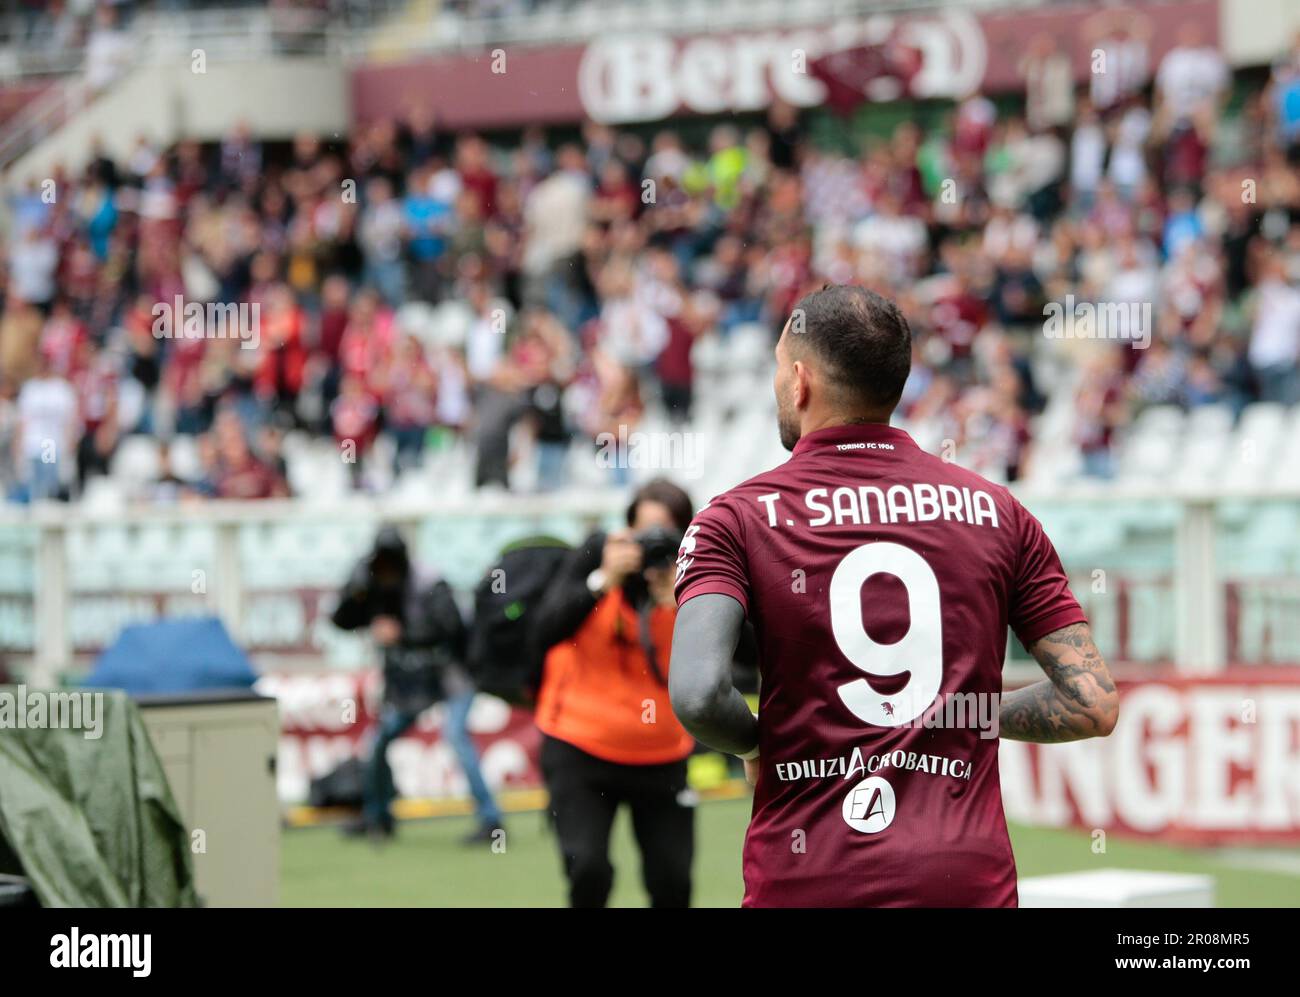 Turin, Italy. 07th May, 2023. Antonio Sanabria of Torino FC celebrating  with fans after a goal during the Italian Serie A, football match between Torino  Fc and Ac Monza on 07 of